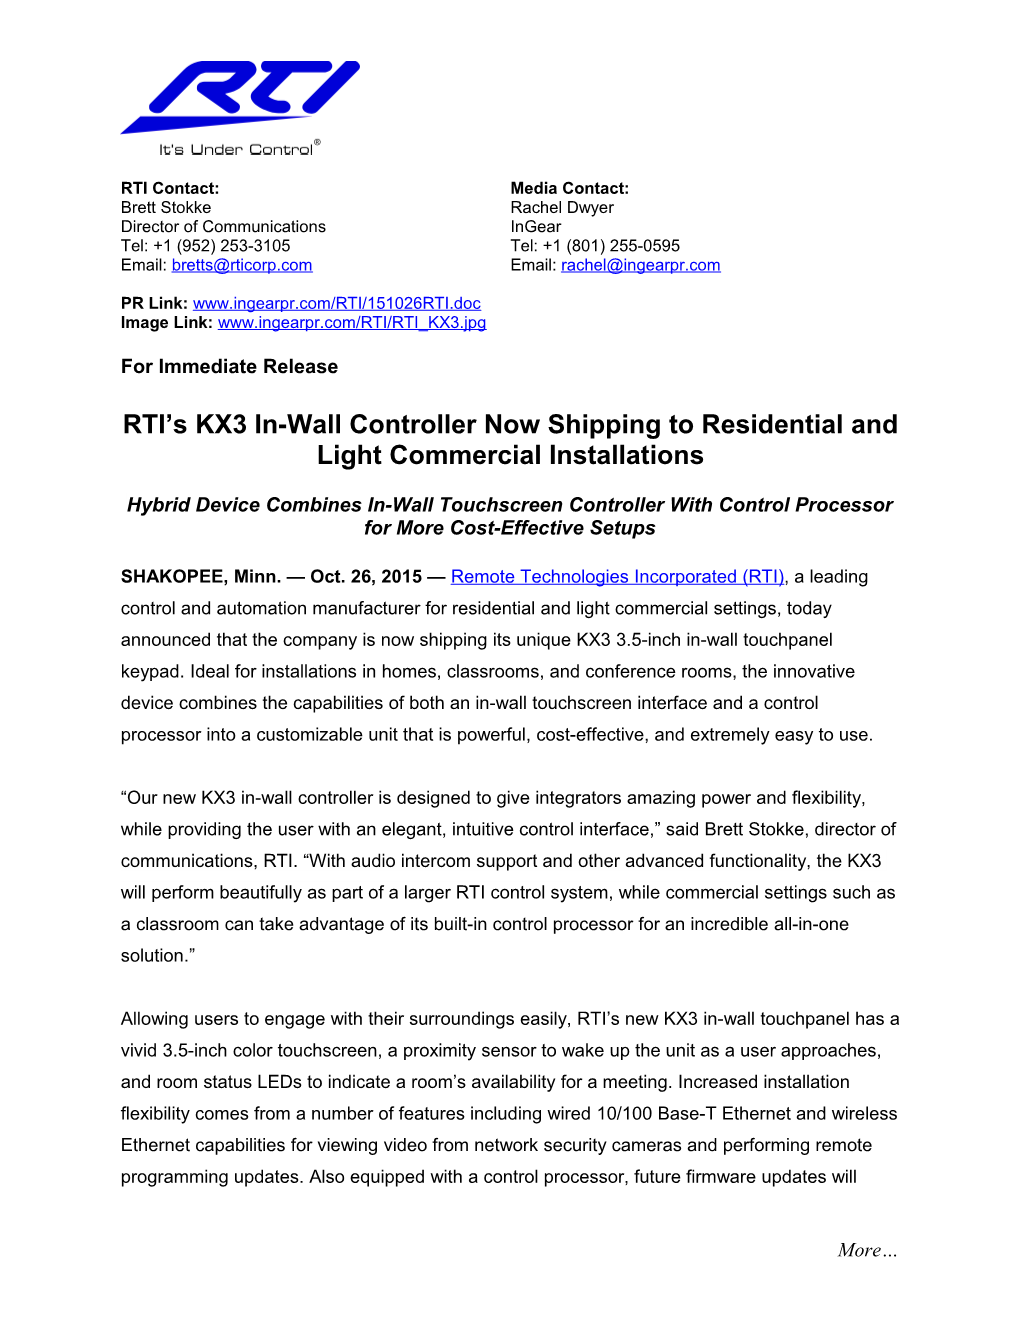 RTI S KX3 In-Wall Controller Now Shipping to Residential and Light Commercial Installations